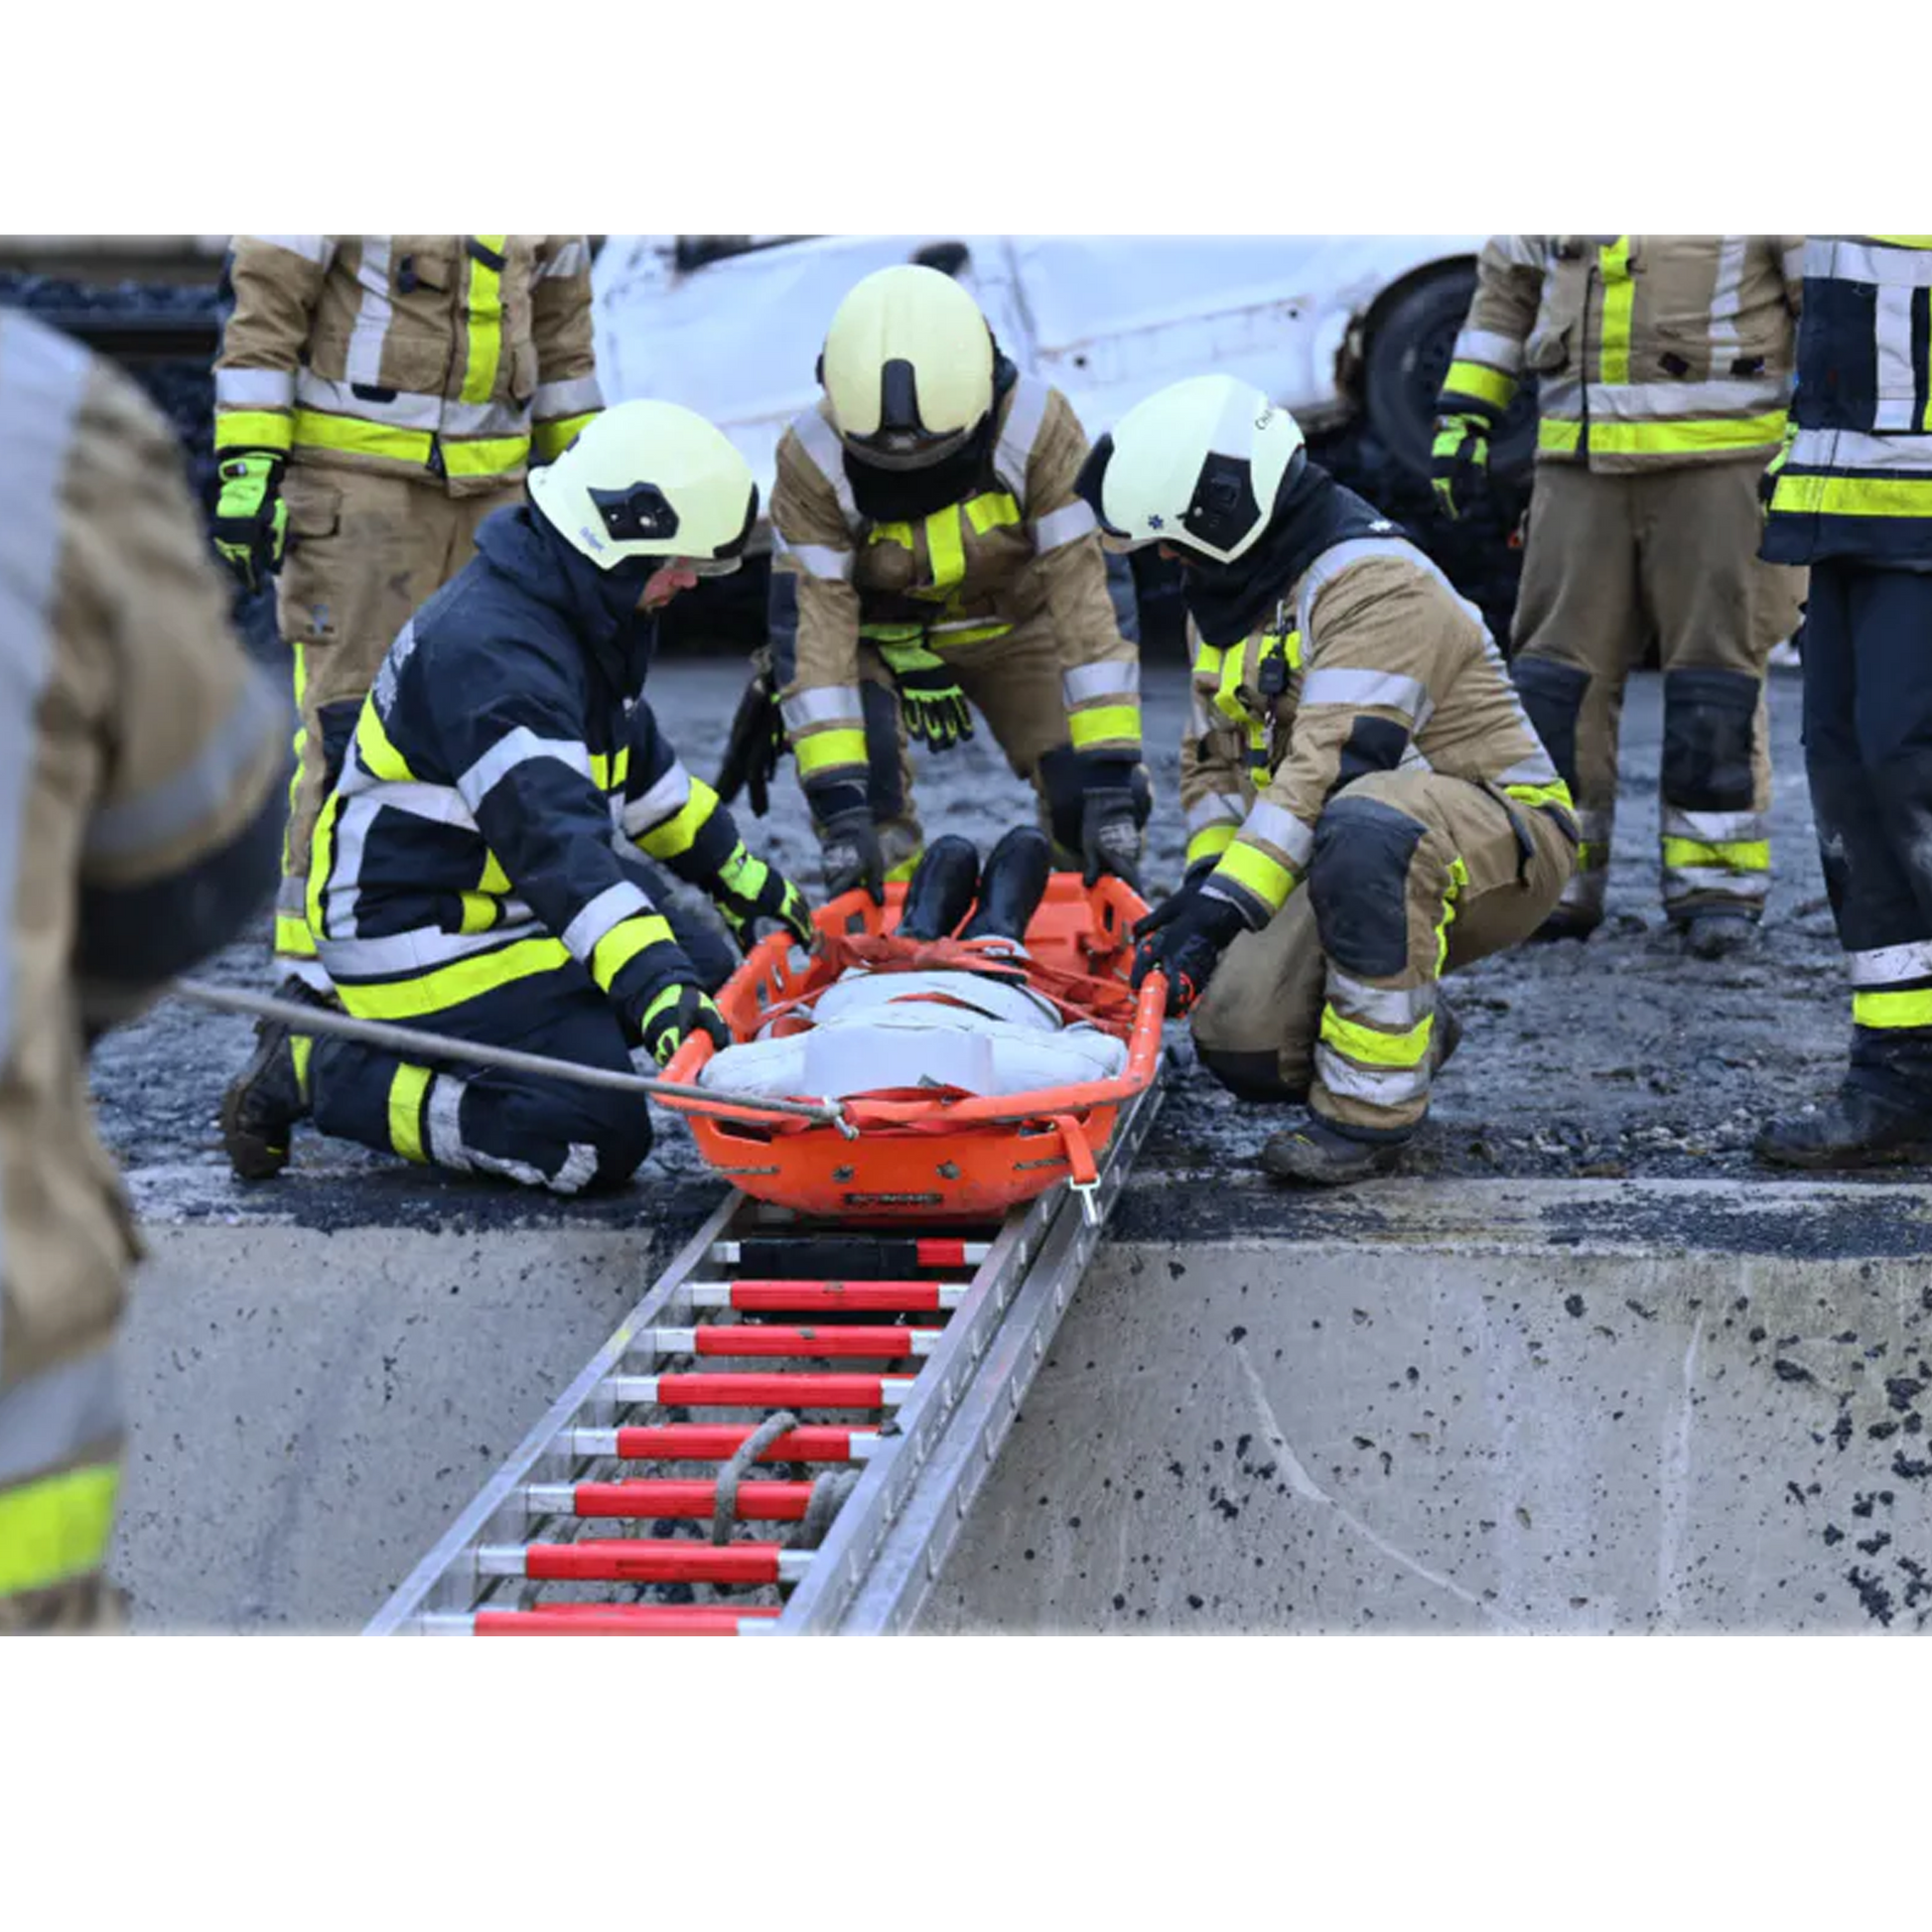 SPENCER® Universal Shell Basket Stretcher. In use with the Fire Brigade.